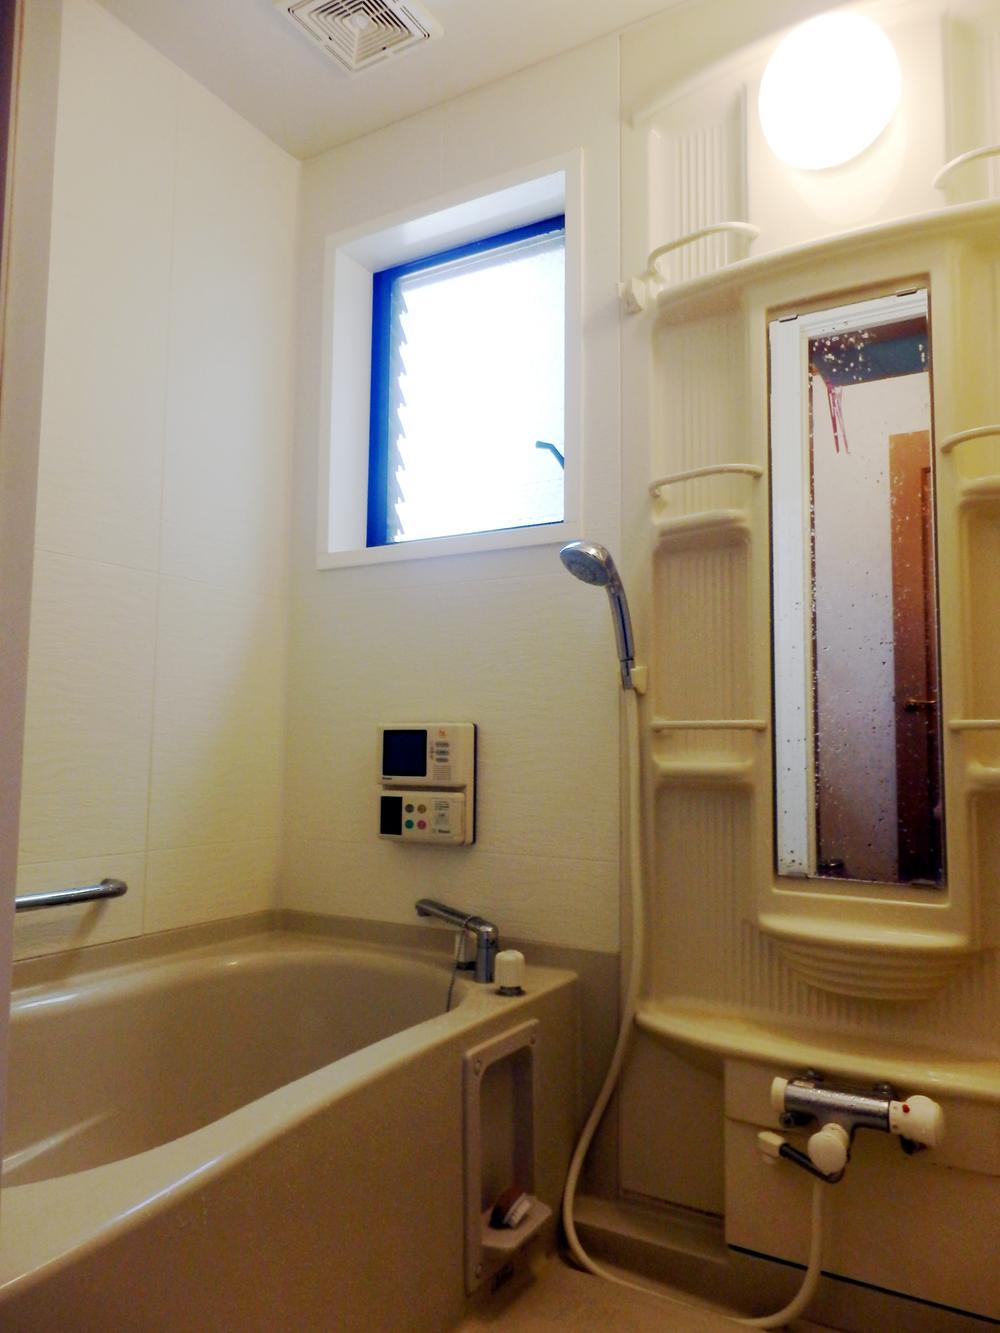 Bathroom. There is also a window in the bathroom, Excellent ventilation. 